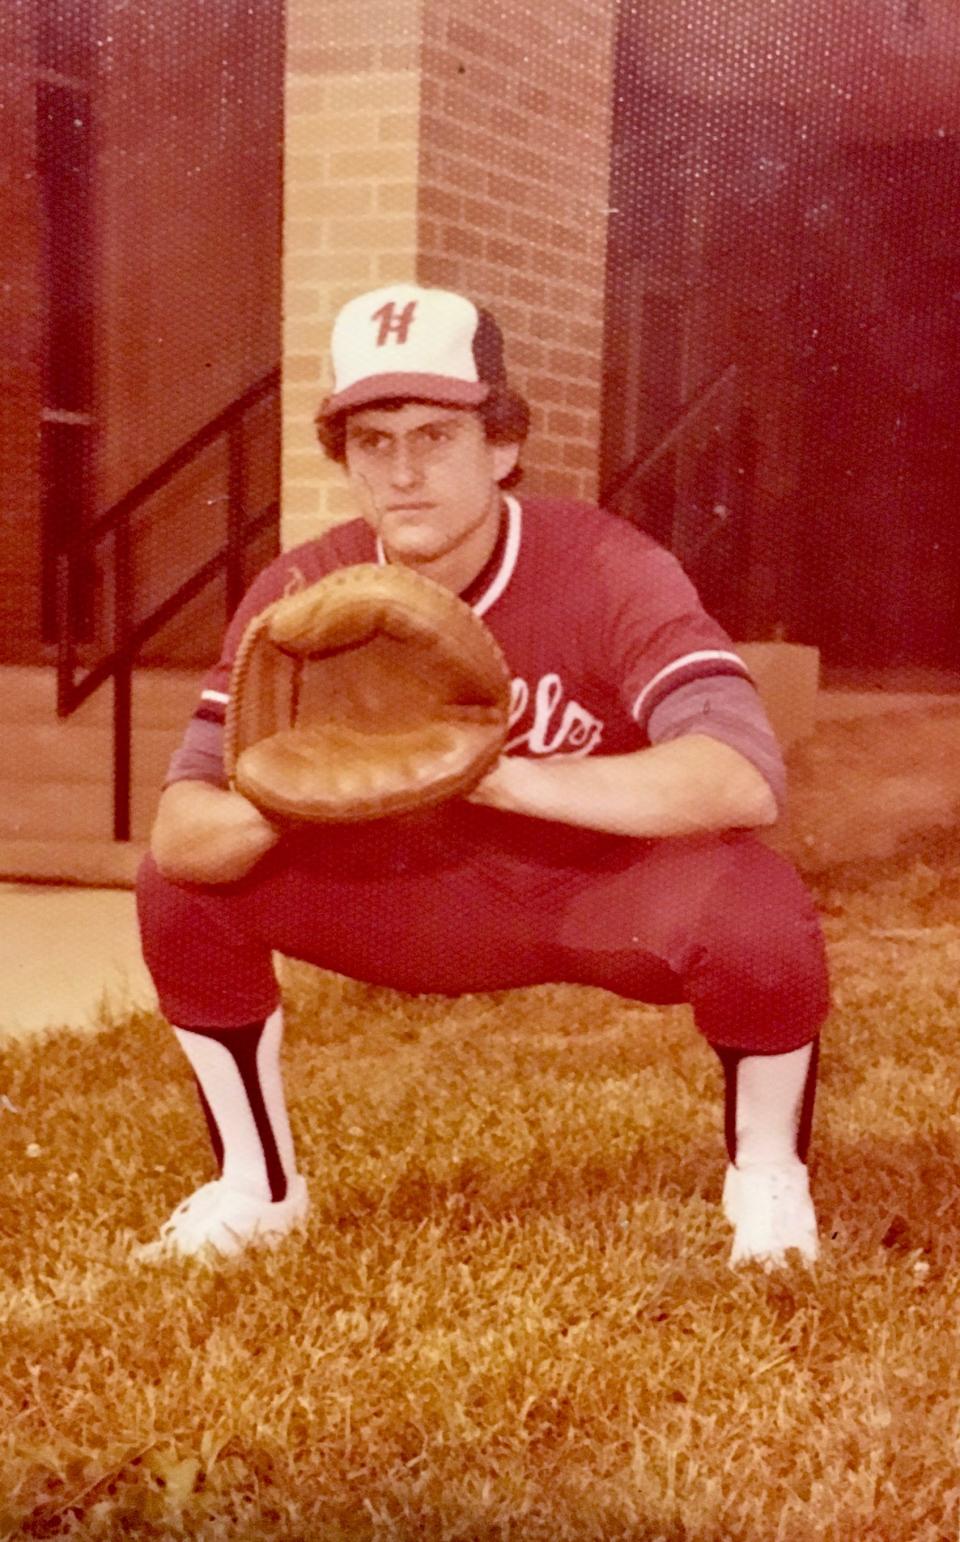 Dean Craig was a great catcher for Halls High School in the late '70s.